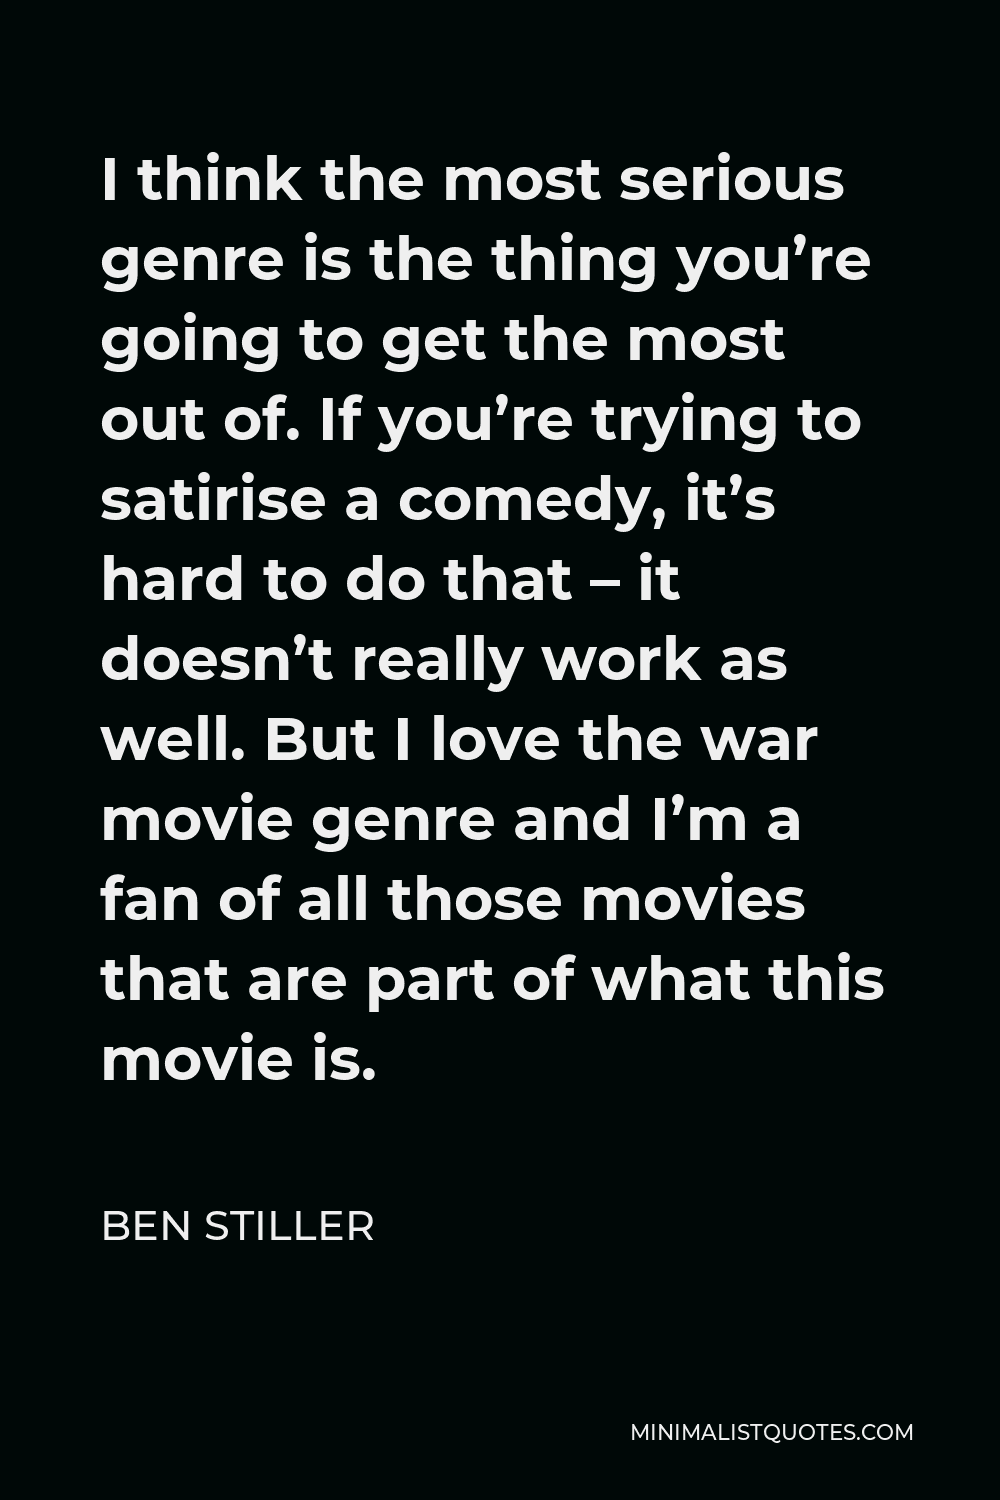 Ben Stiller Quote - I think the most serious genre is the thing you’re going to get the most out of. If you’re trying to satirise a comedy, it’s hard to do that – it doesn’t really work as well. But I love the war movie genre and I’m a fan of all those movies that are part of what this movie is.